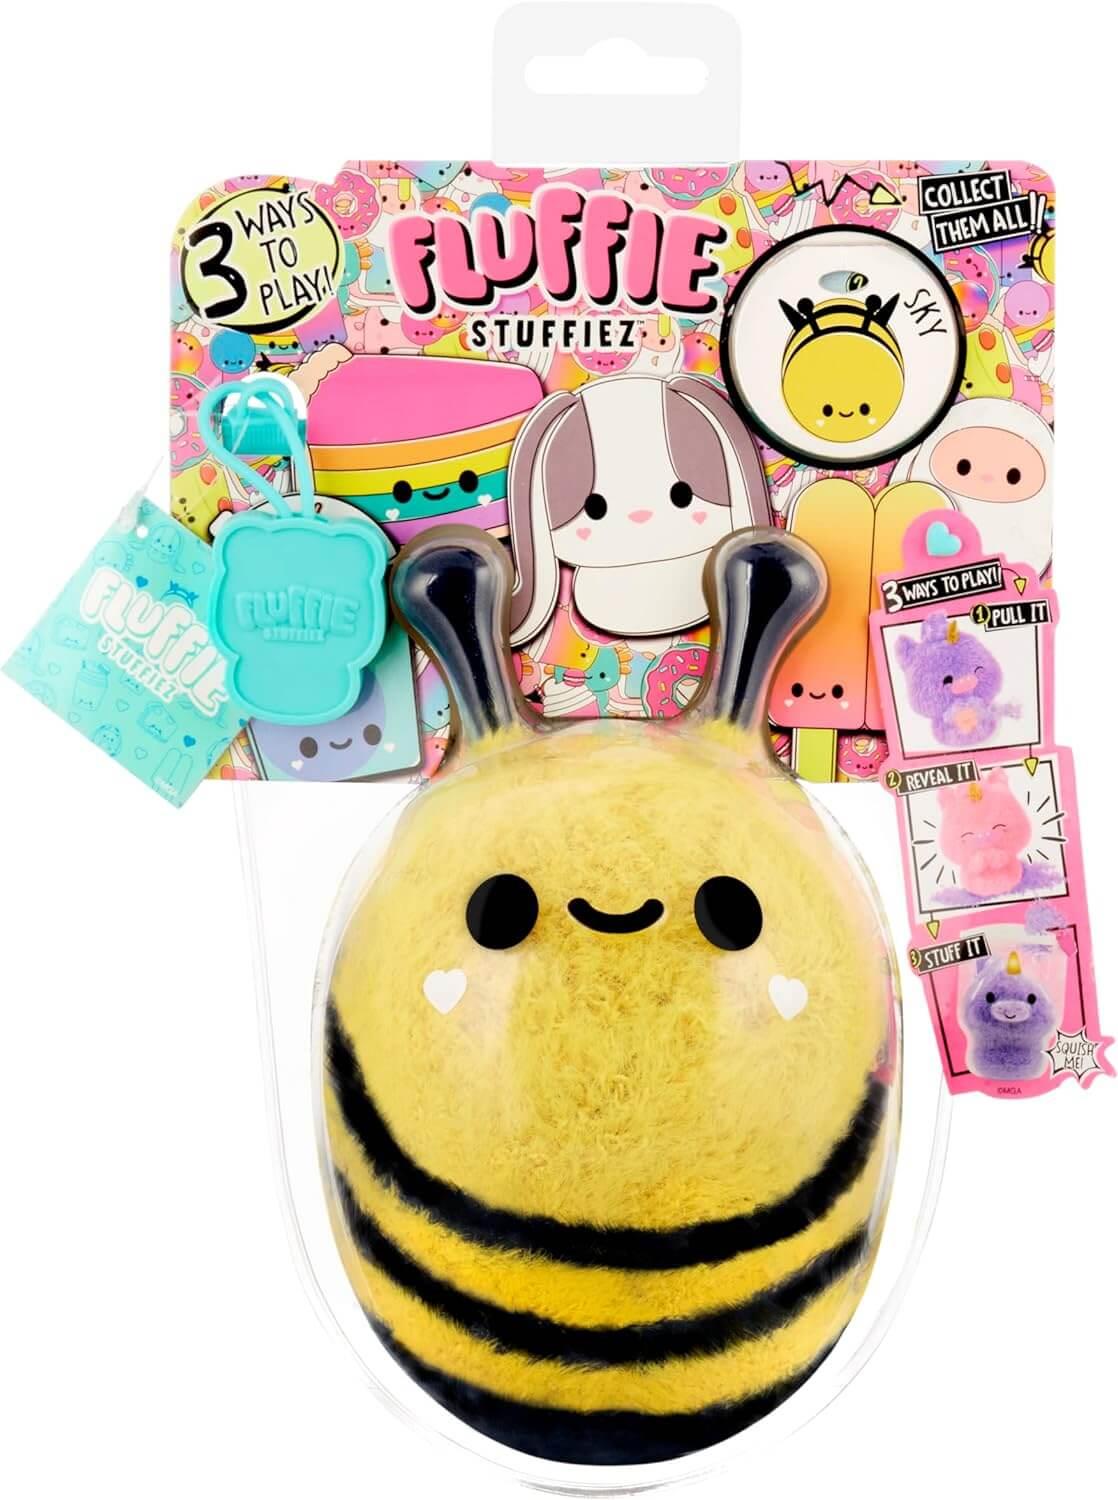 Fluffie Stuffiez Bee Small Collectible Feature Plush